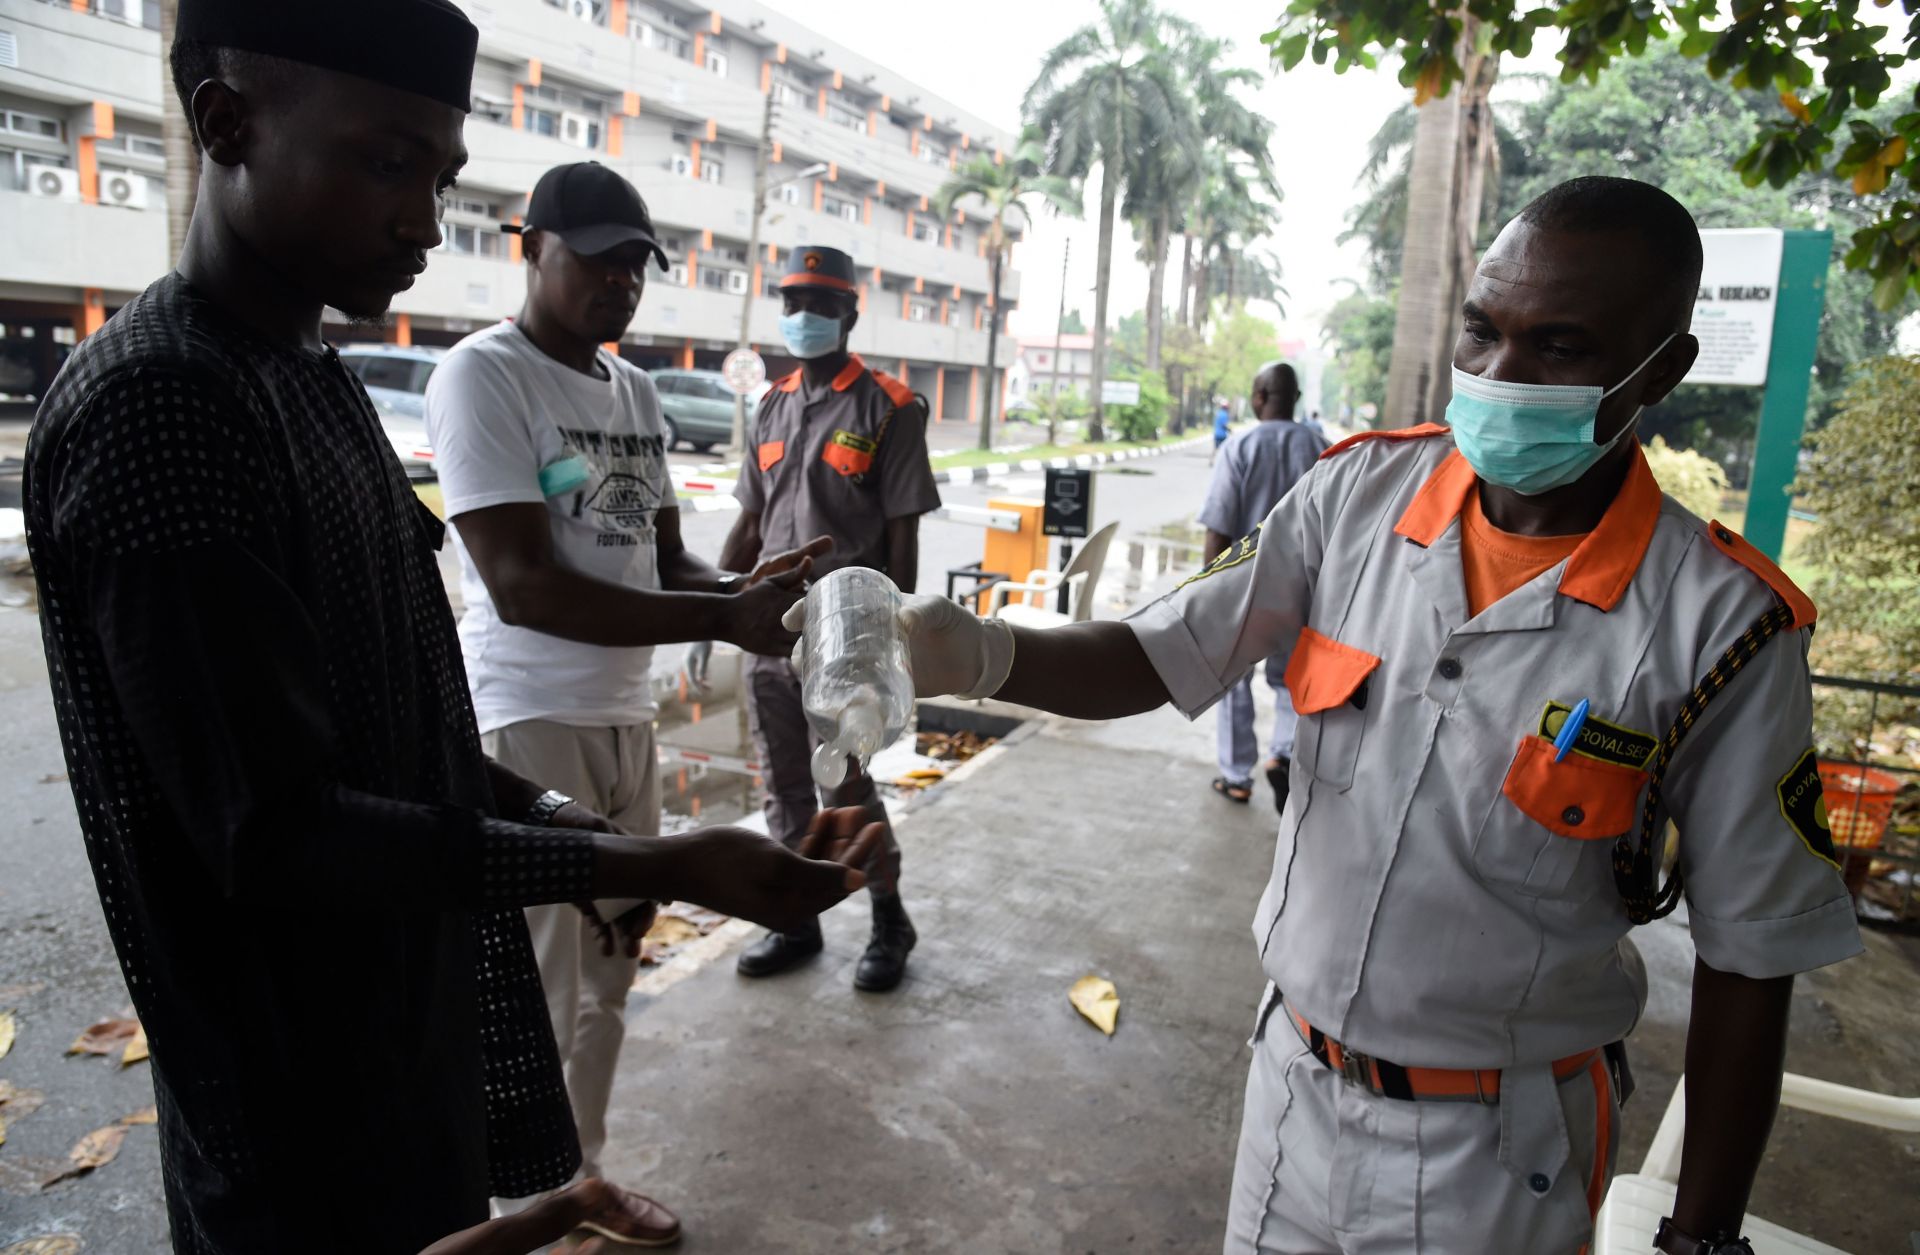 A photo of a security official administers hand sanitizer in Lagos, Nigeria, on Feb. 28, 2020. The city's 20 million residents scrambled for hygiene products following the announcement of the first confirmed coronavirus case in sub-Saharan Africa.